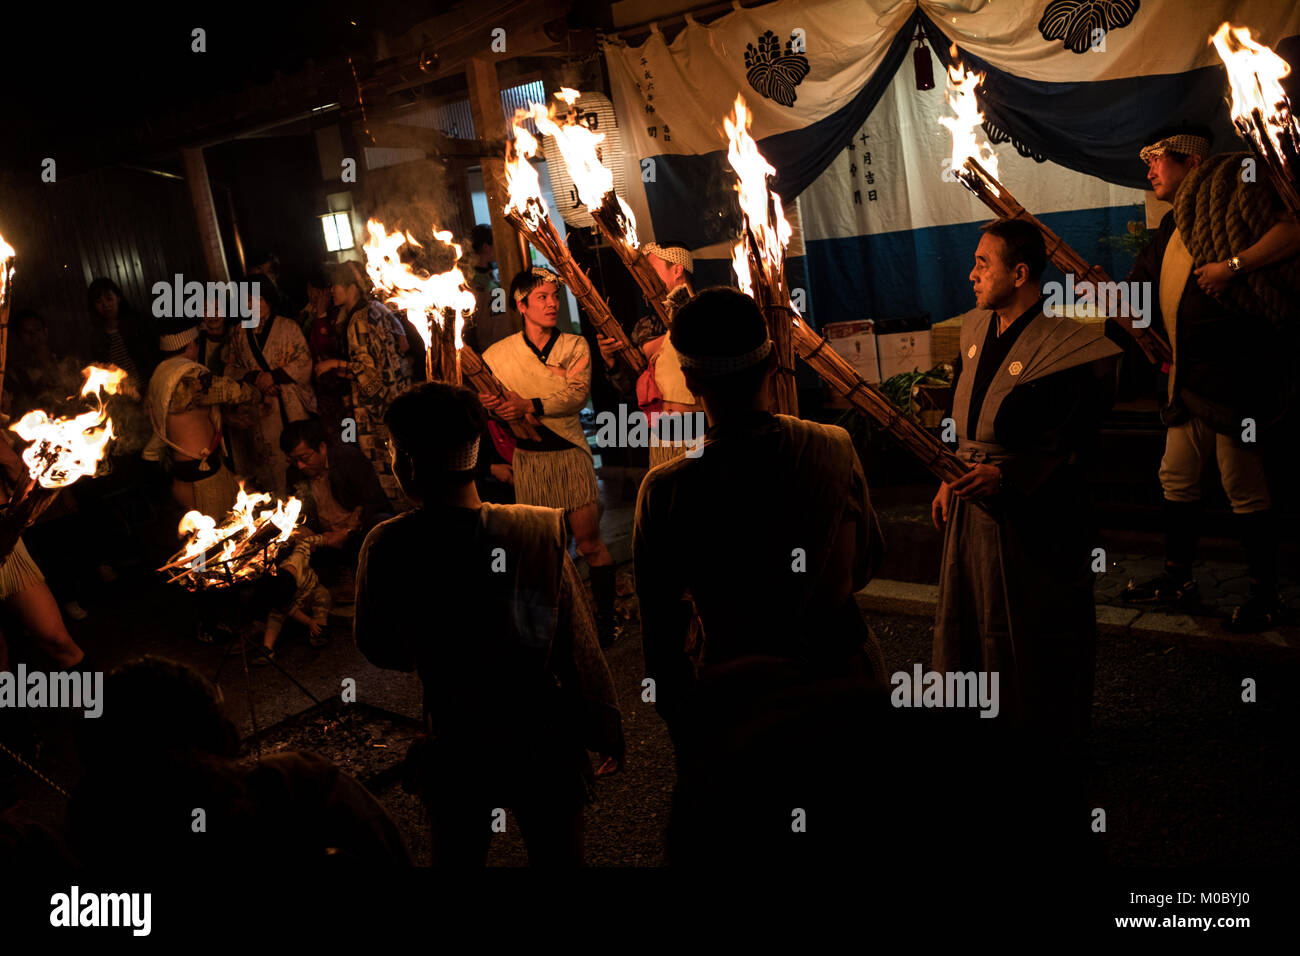 A group of men holding torches at Kurama fire festival, Japan Stock Photo